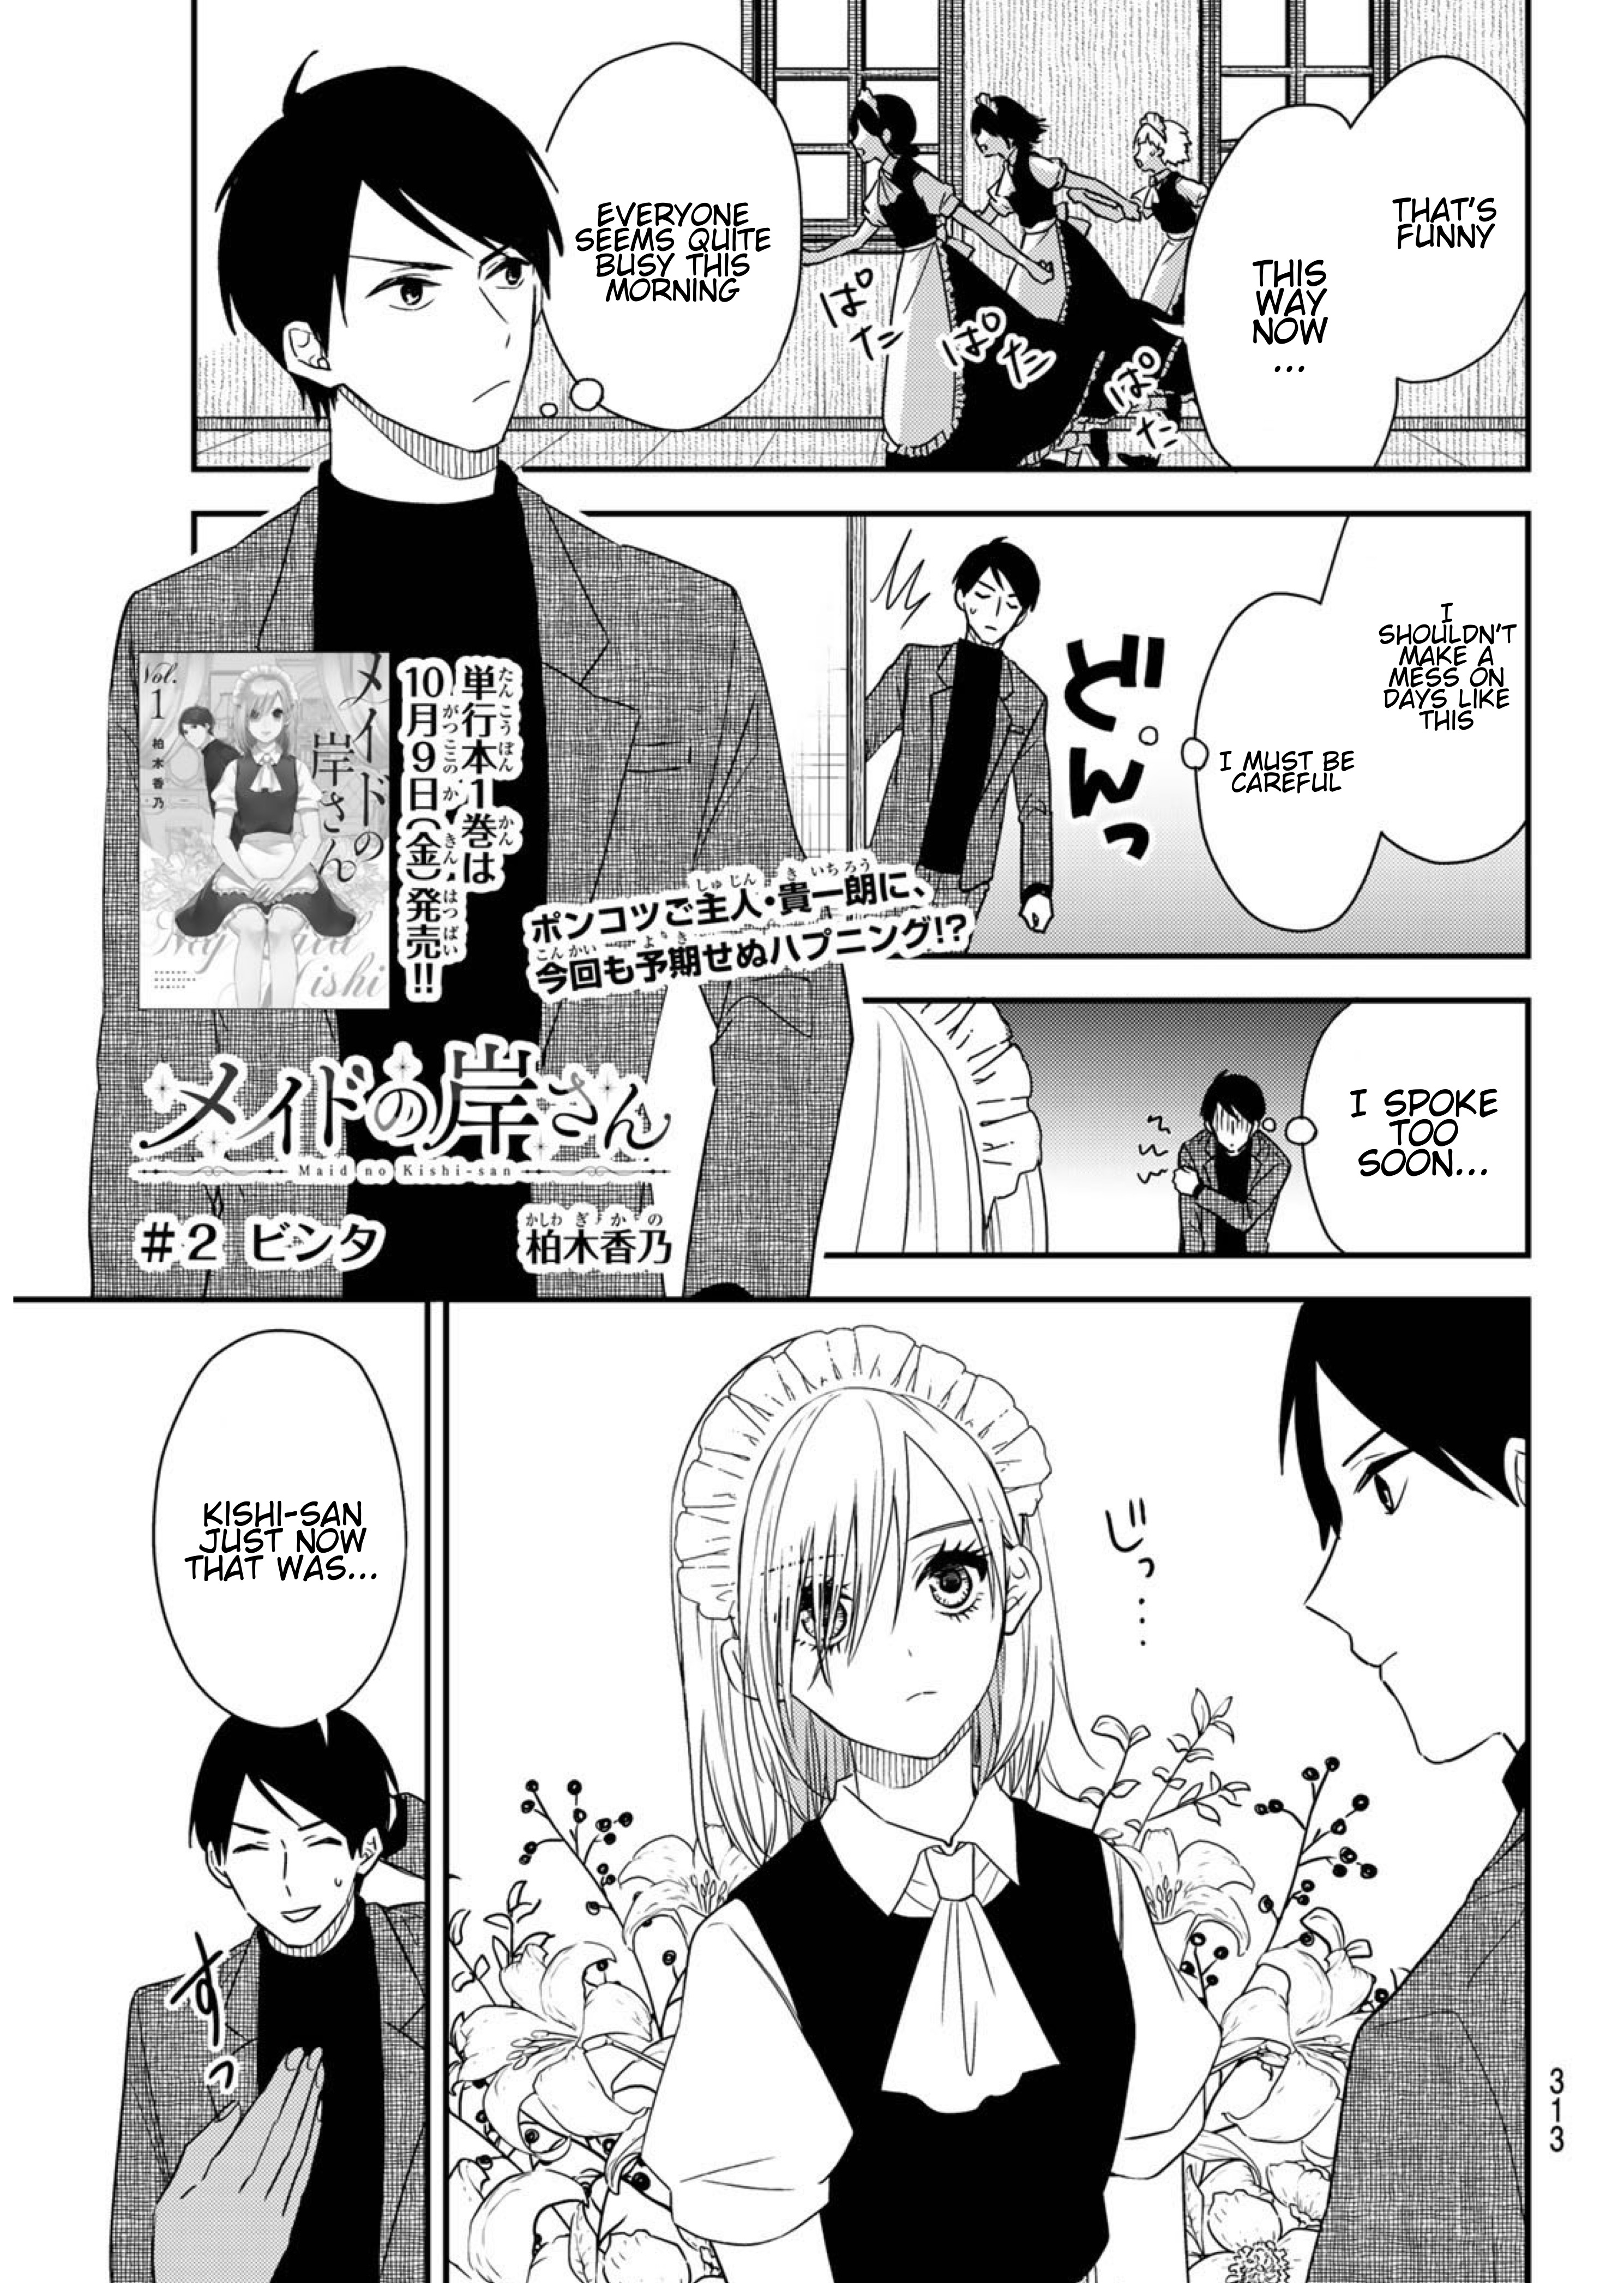 Maid No Kishi-San Vol.4 Chapter 47.1: Slap (Special Business Edition 2) - Picture 2